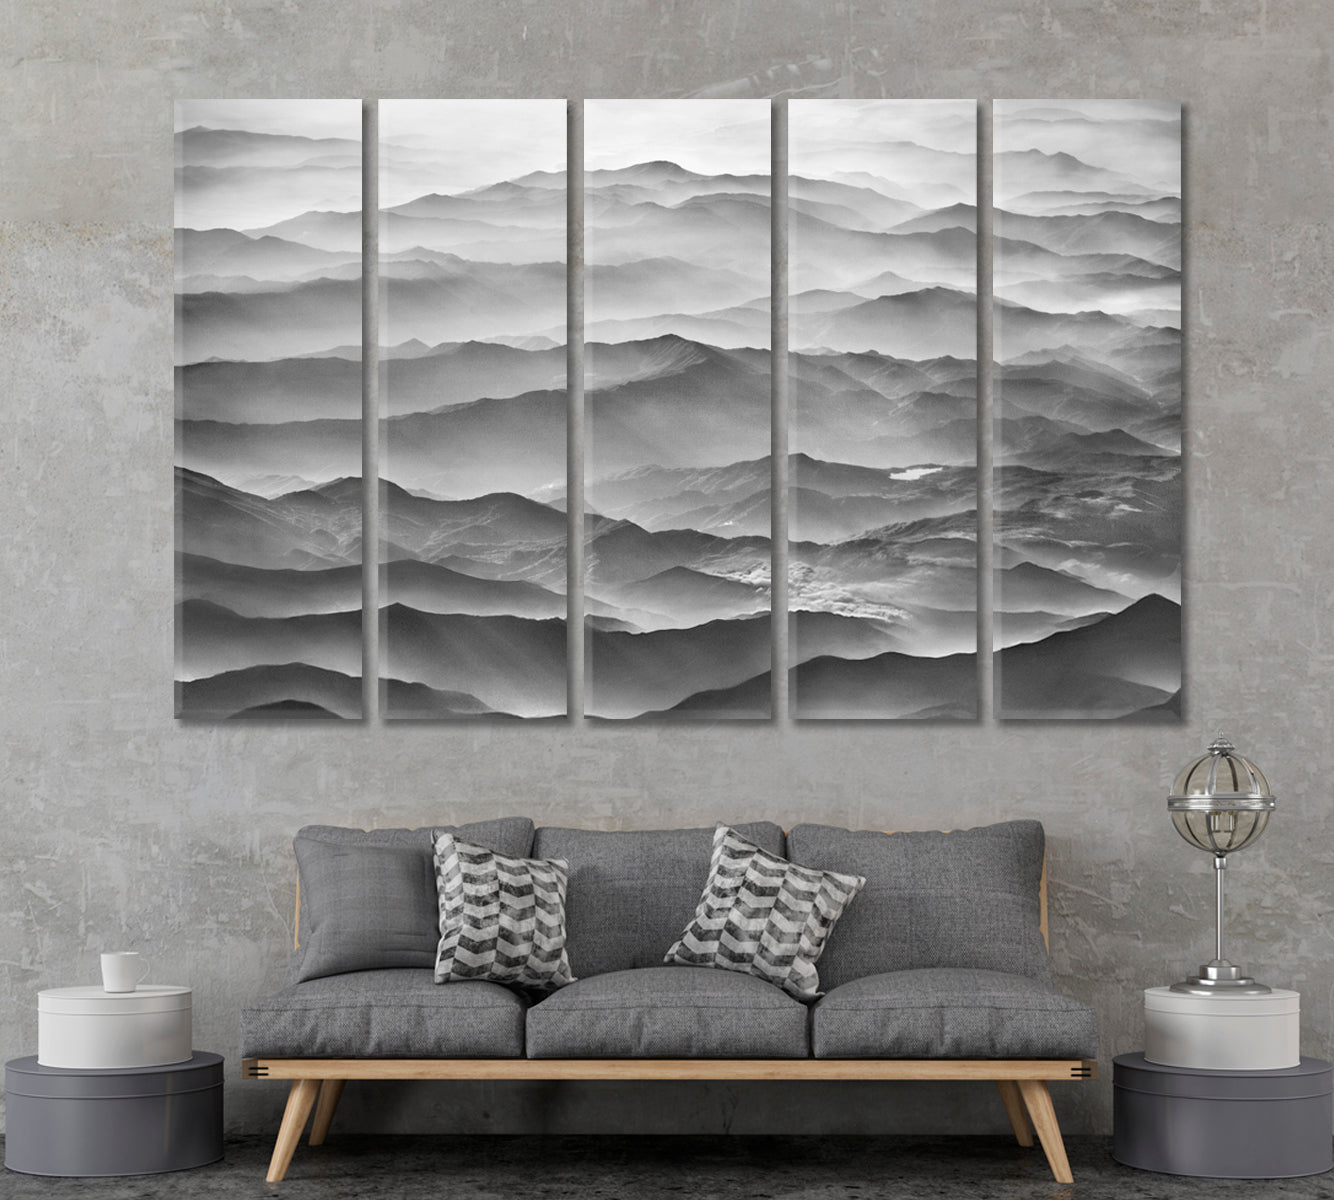 Foggy Mountain on Black And White Canvas Print ArtLexy 5 Panels 36"x24" inches 